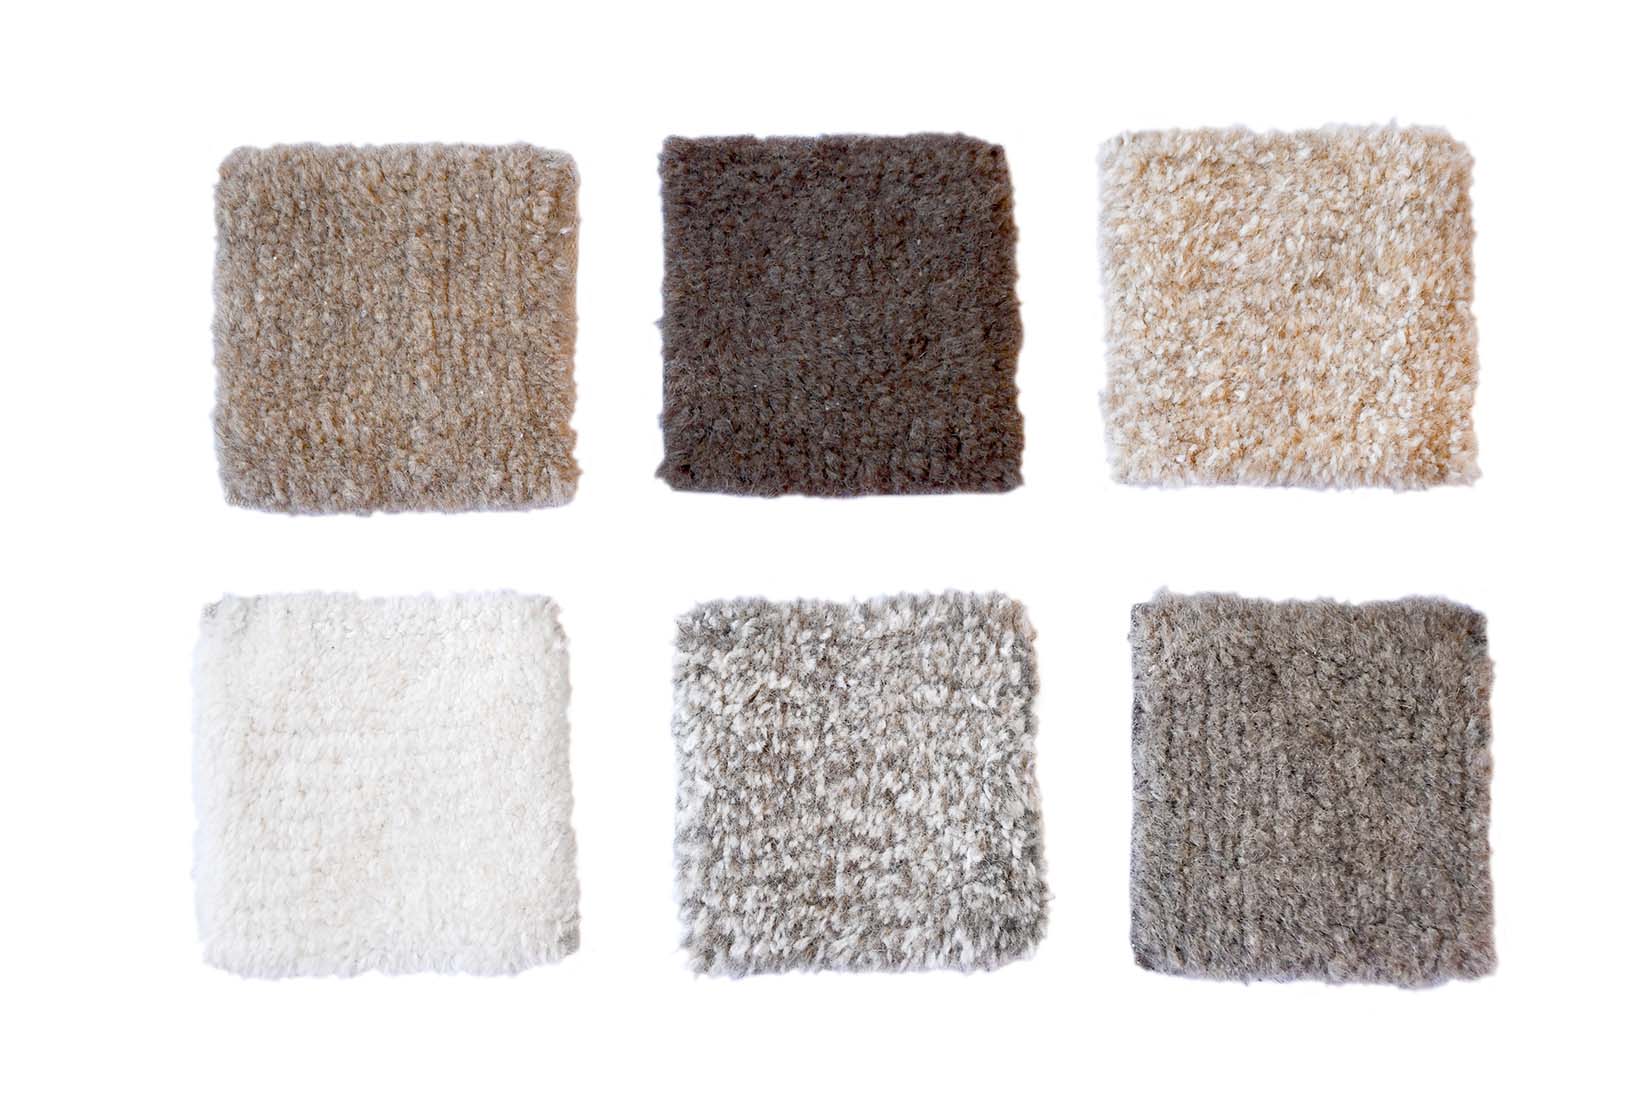 brown washable wool rug with textured detail
